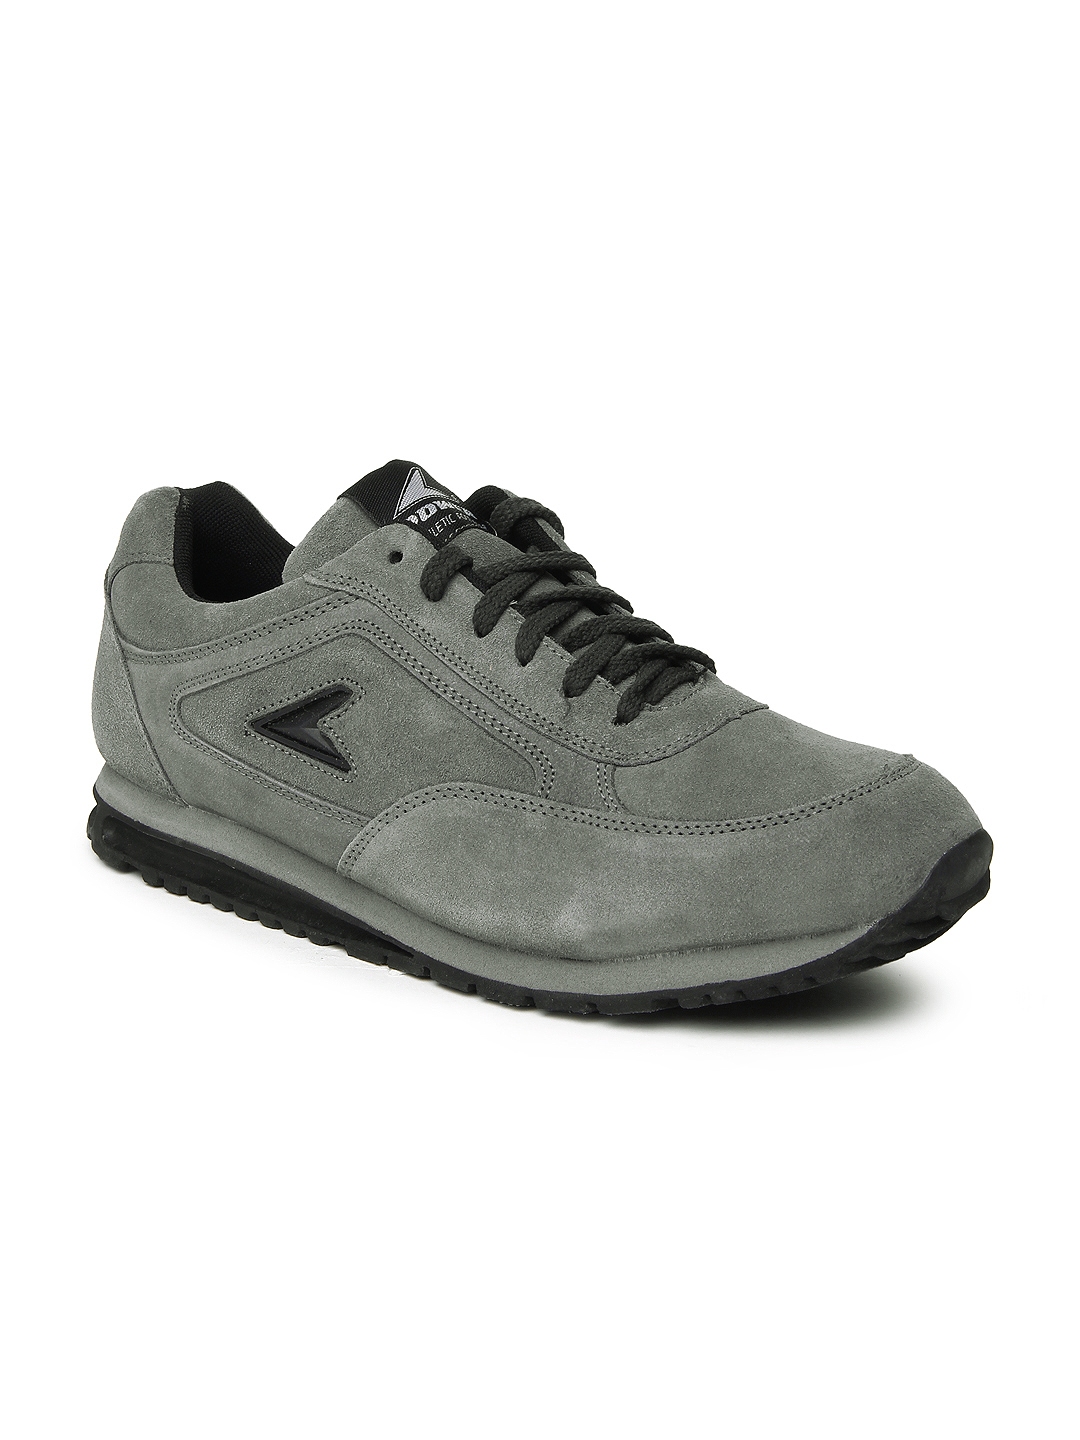 Buy Power Men Grey Suede Training Shoes - Casual Shoes for Men 438428 ...